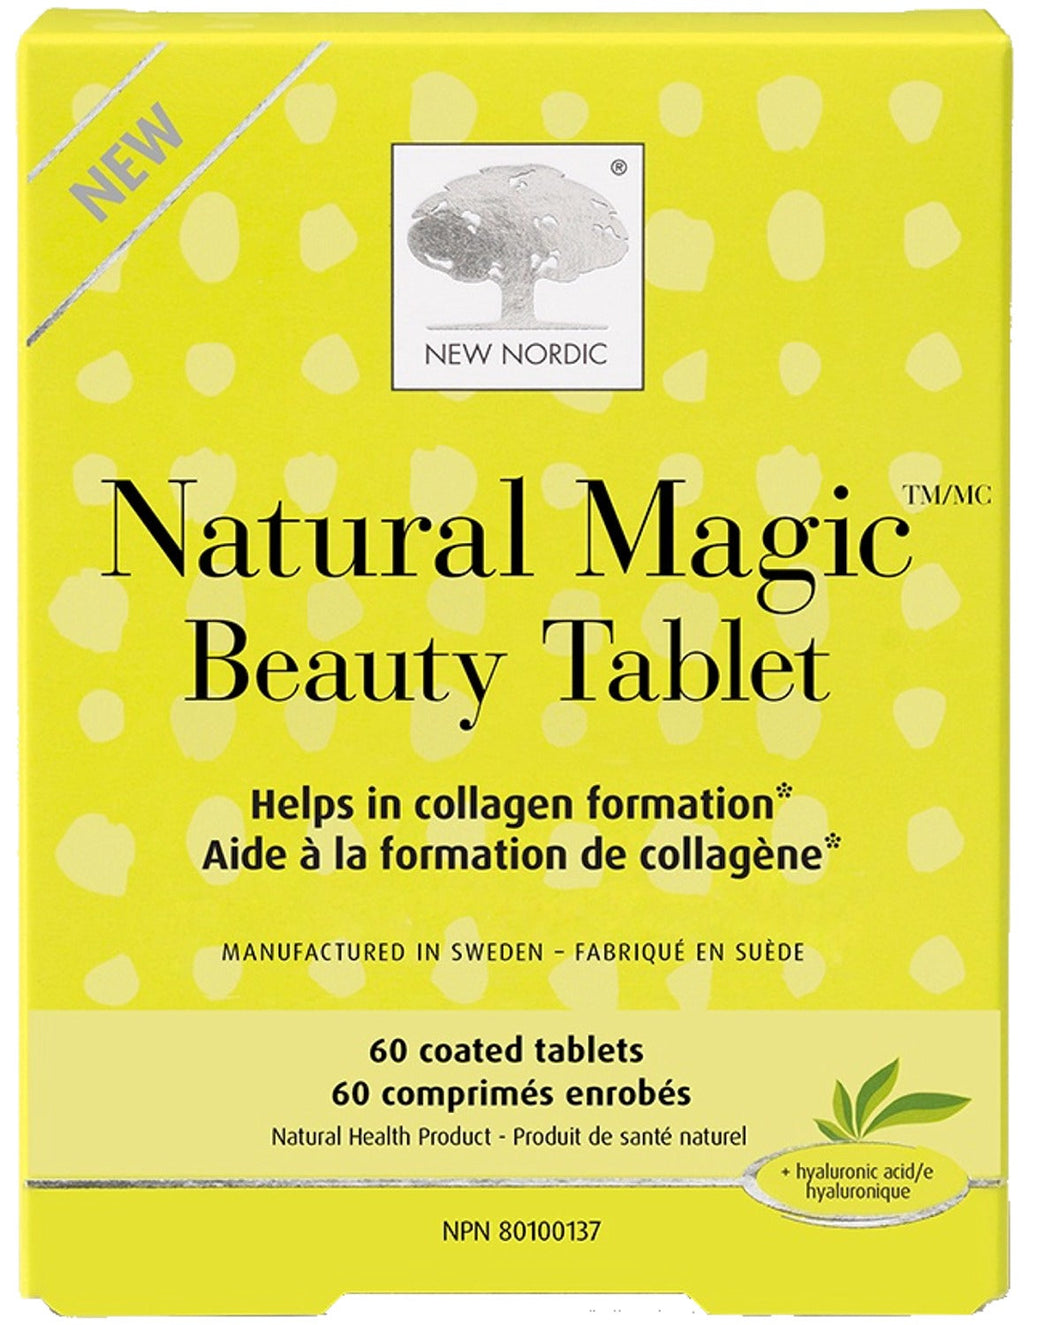 NEW NORDIC Natural Magic BeautyTablet ( 60 Coated Tablets)